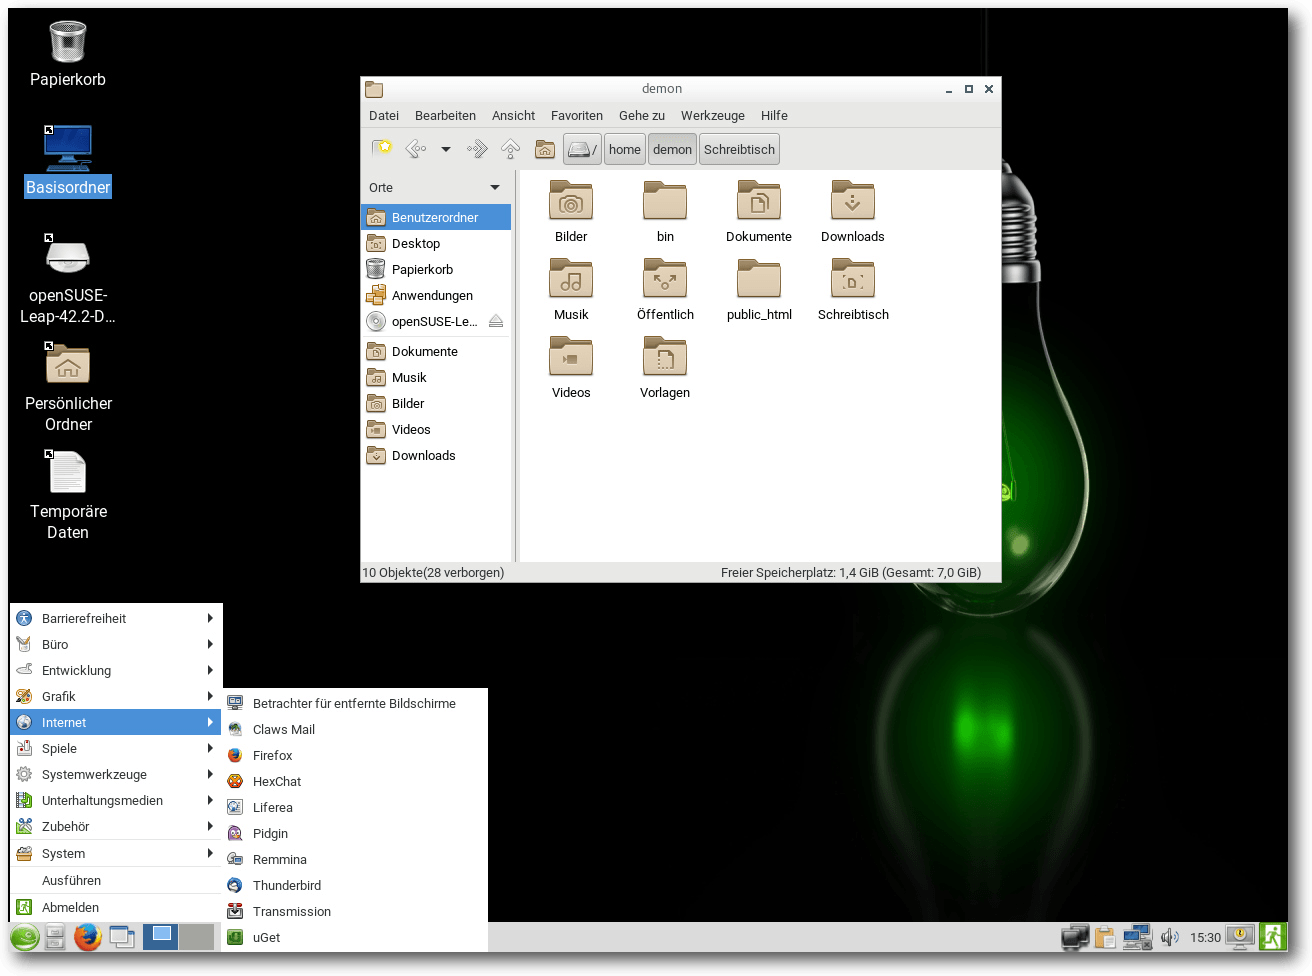 opensuse422_lxde.png